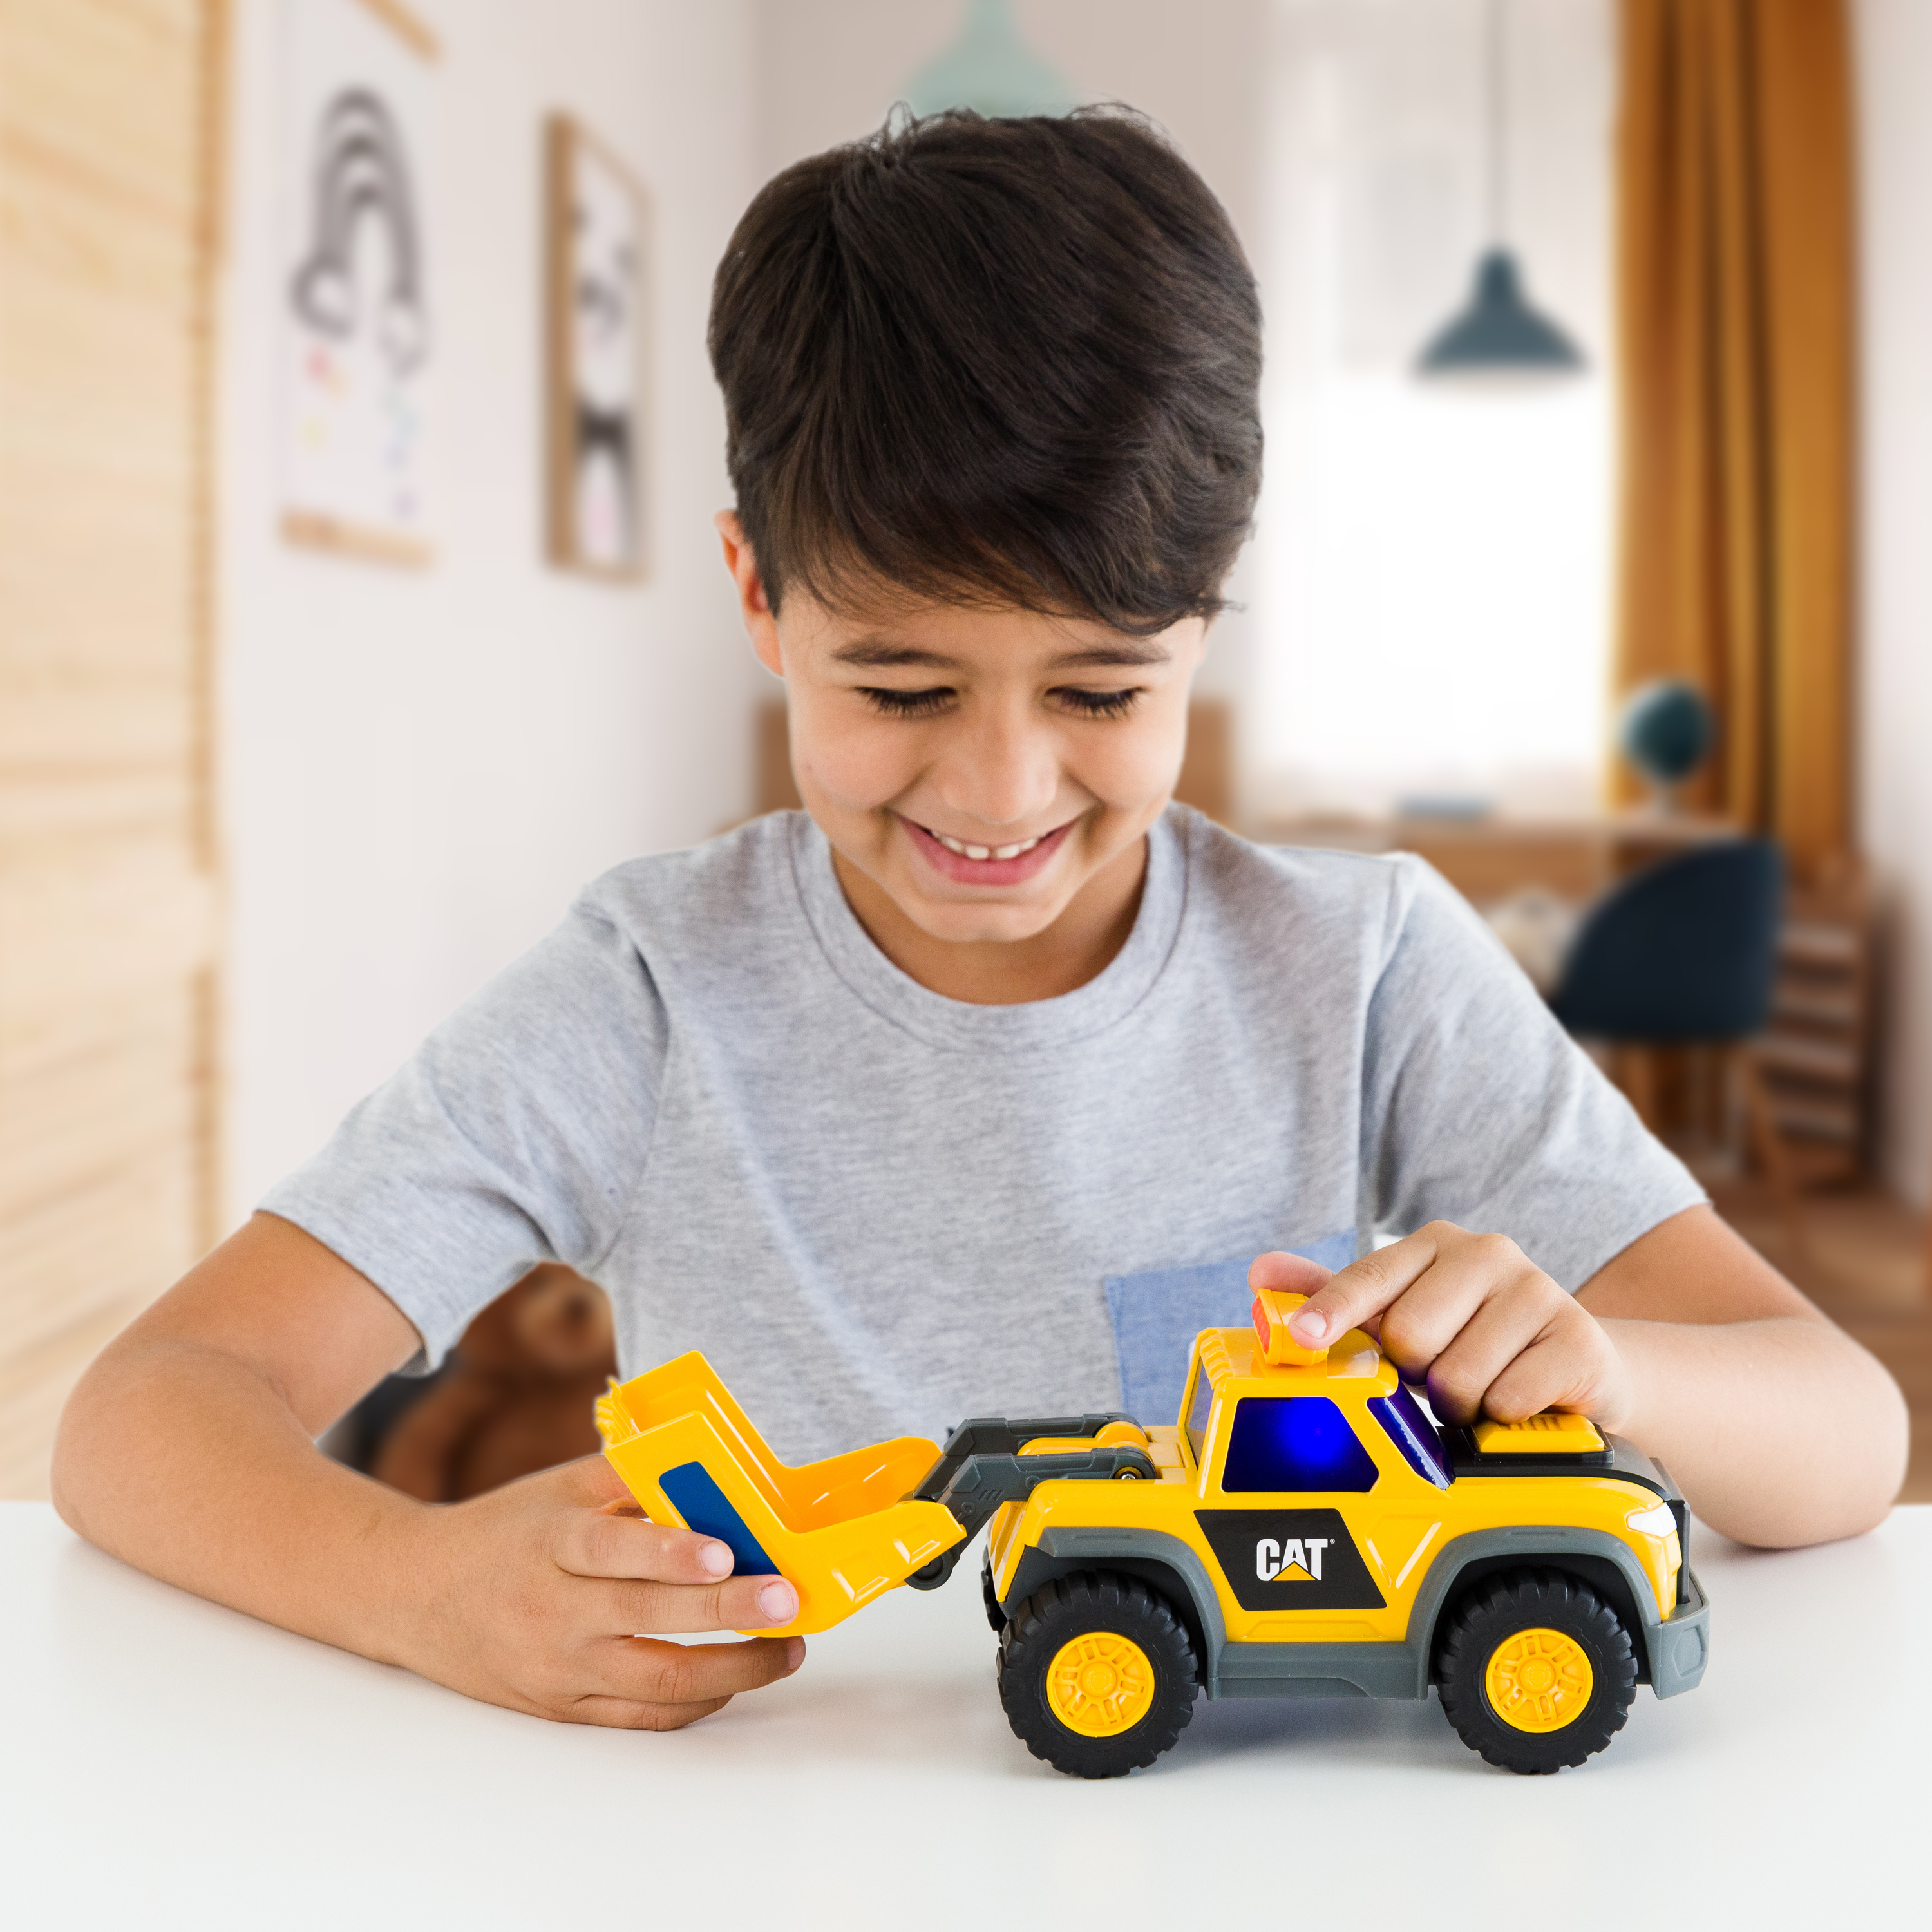 a child transforming the SUV into a wheel loader